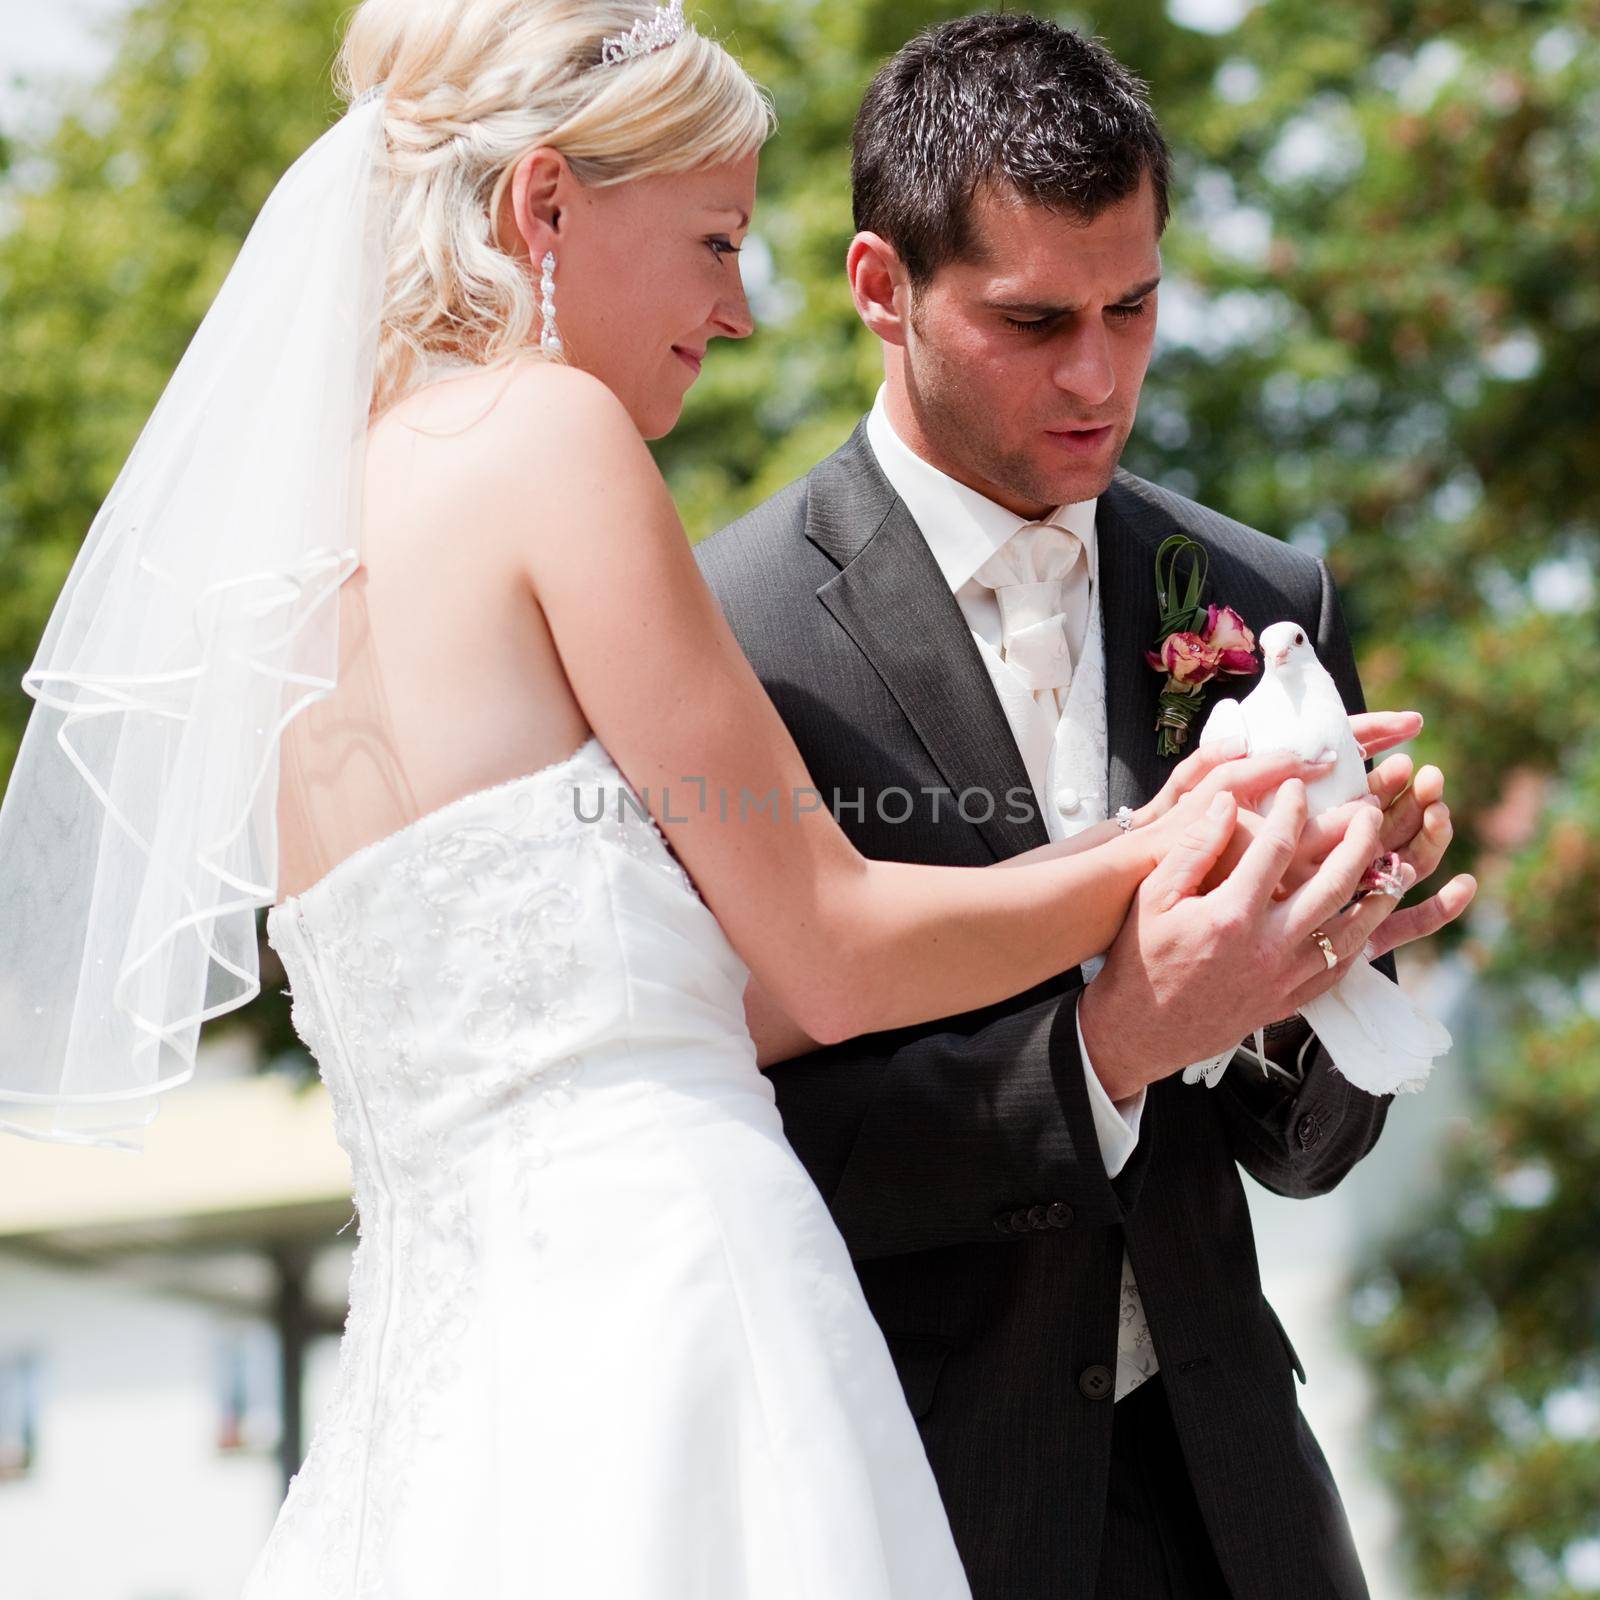 Wedding couple with dove in hand by Kzenon